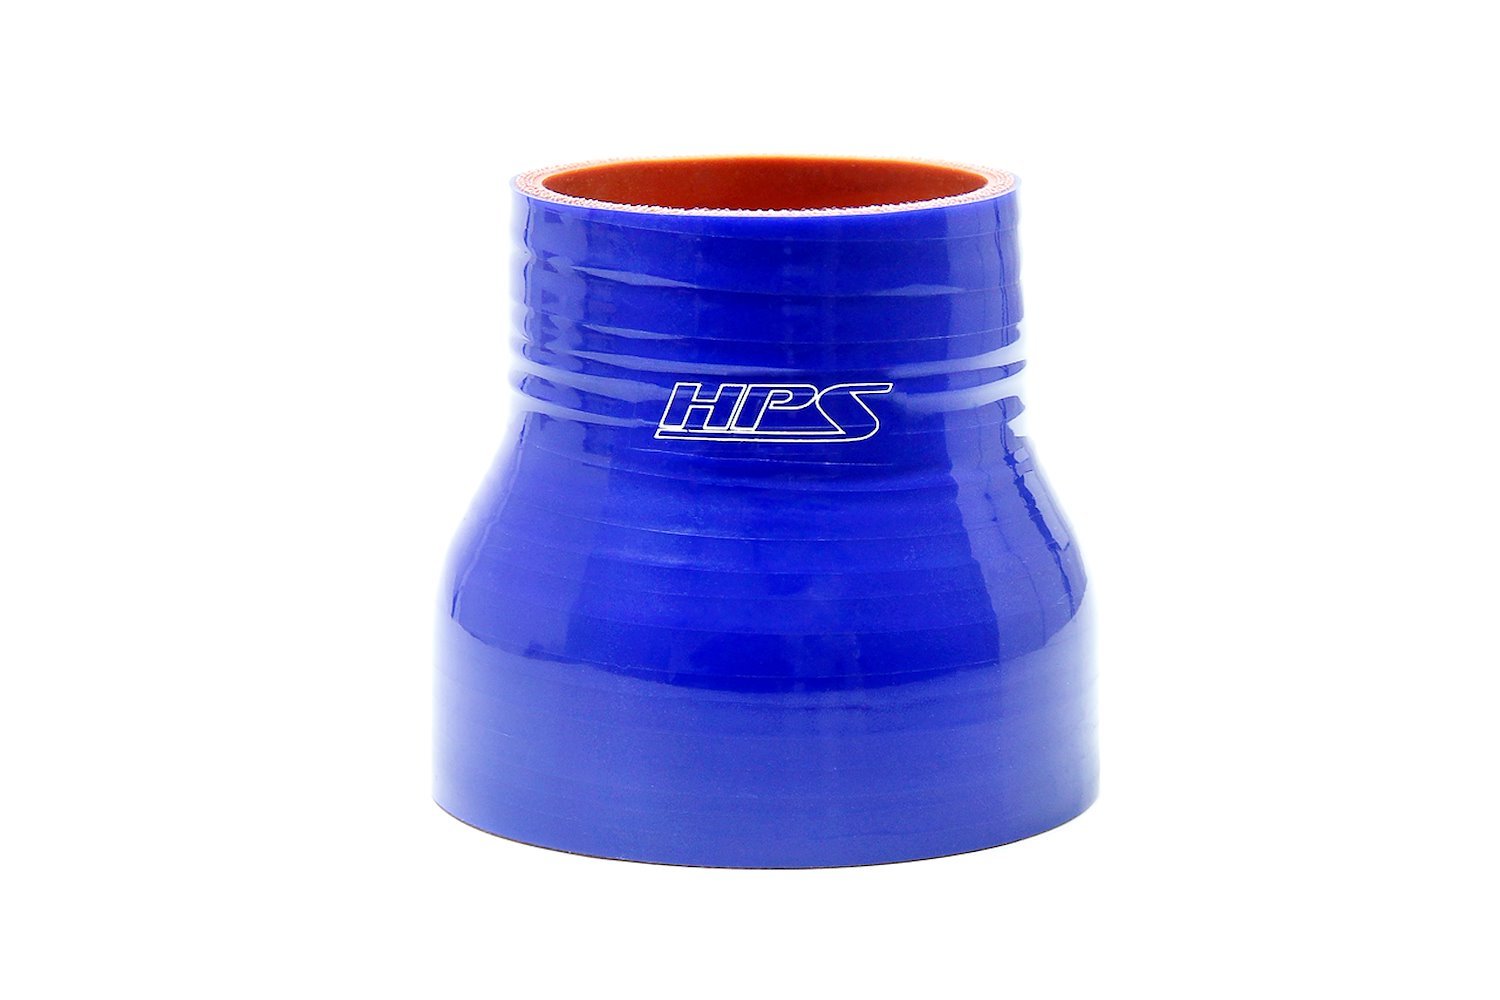 HTSR-212-300-BLUE Silicone Reducer Hose, High-Temp 4-Ply Reinforced, 2-1/8 in. - 3 in. ID, 3 in. Long, Blue